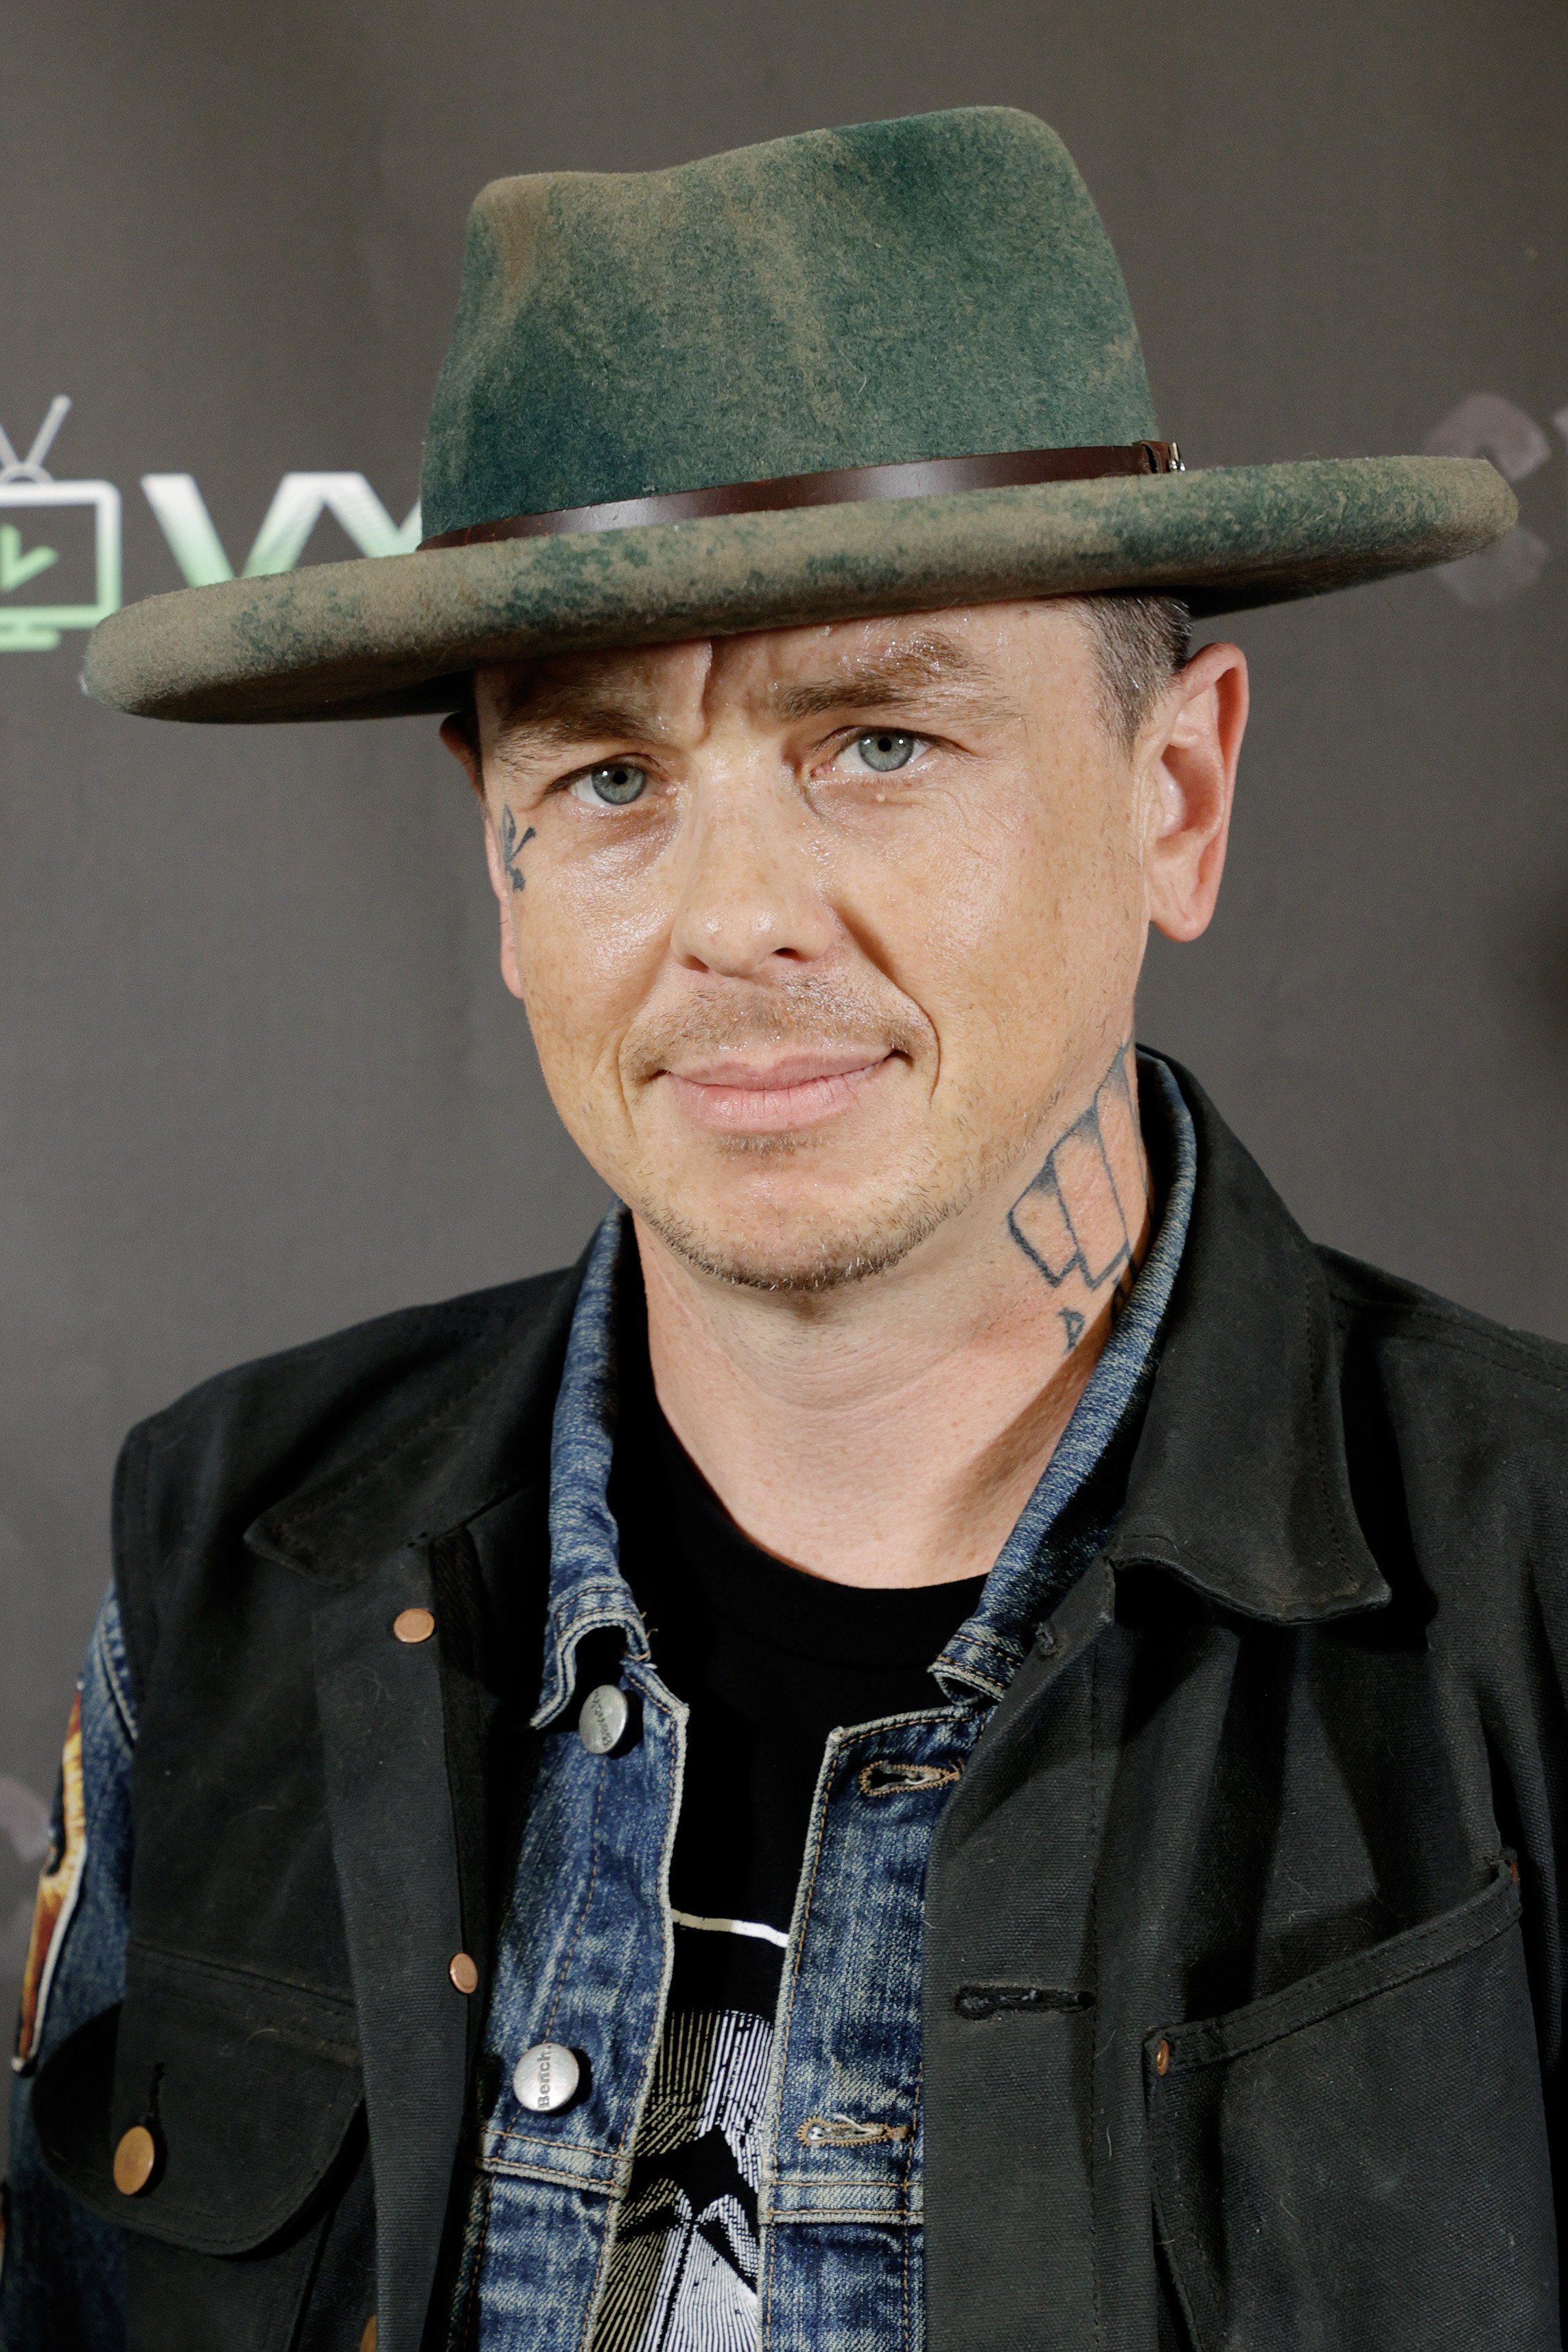 DJ Sid Wilson at the red carpet premiere of "Cracka" at Arena Cinelounge Sunset on June 17, 2021 in Los Angeles, California. | Source: Getty Images